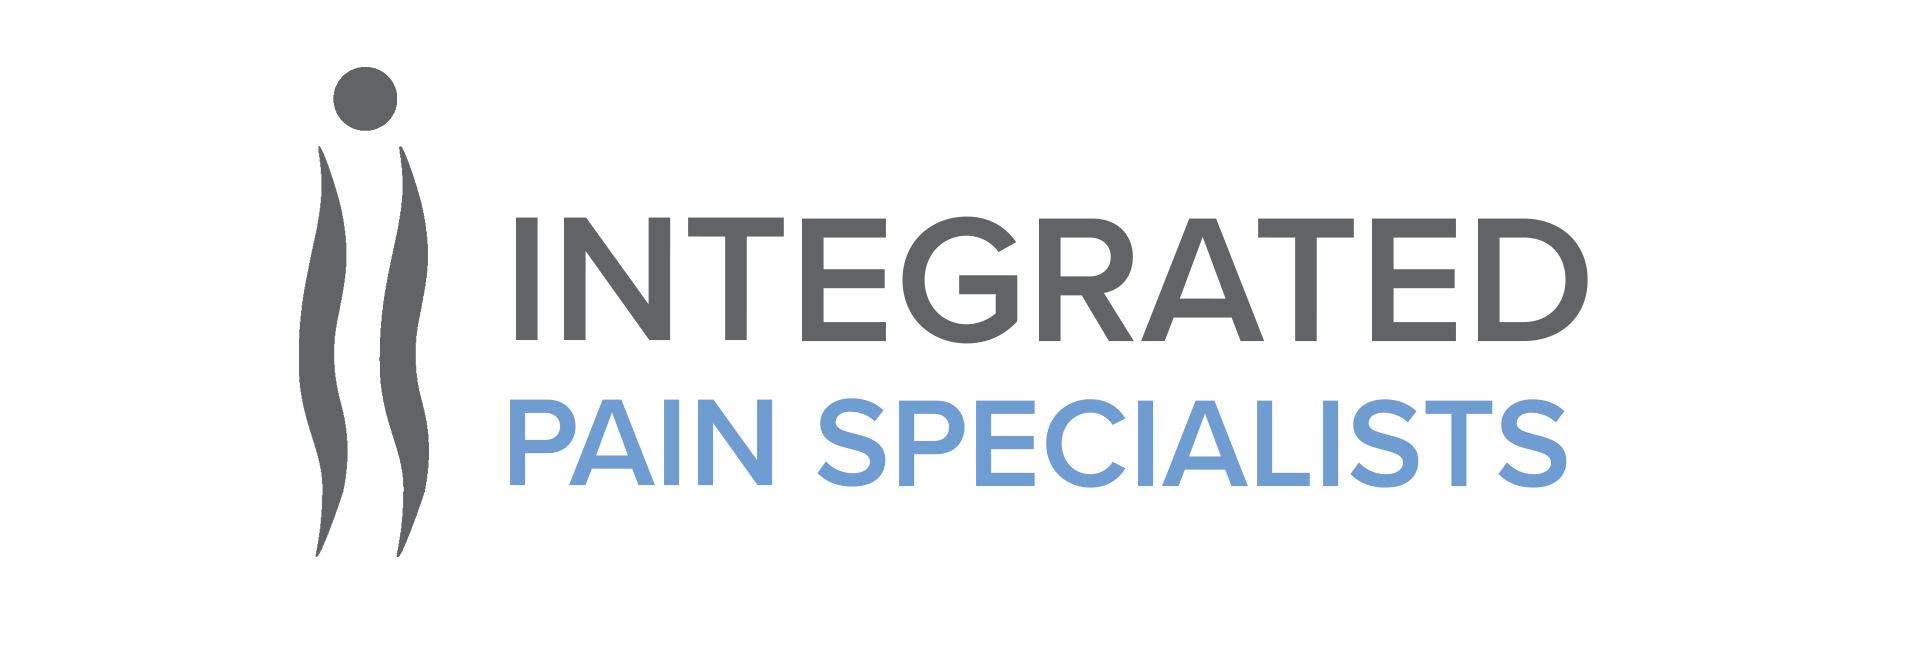 Integrated Pain Specialists Logo Blue and Black